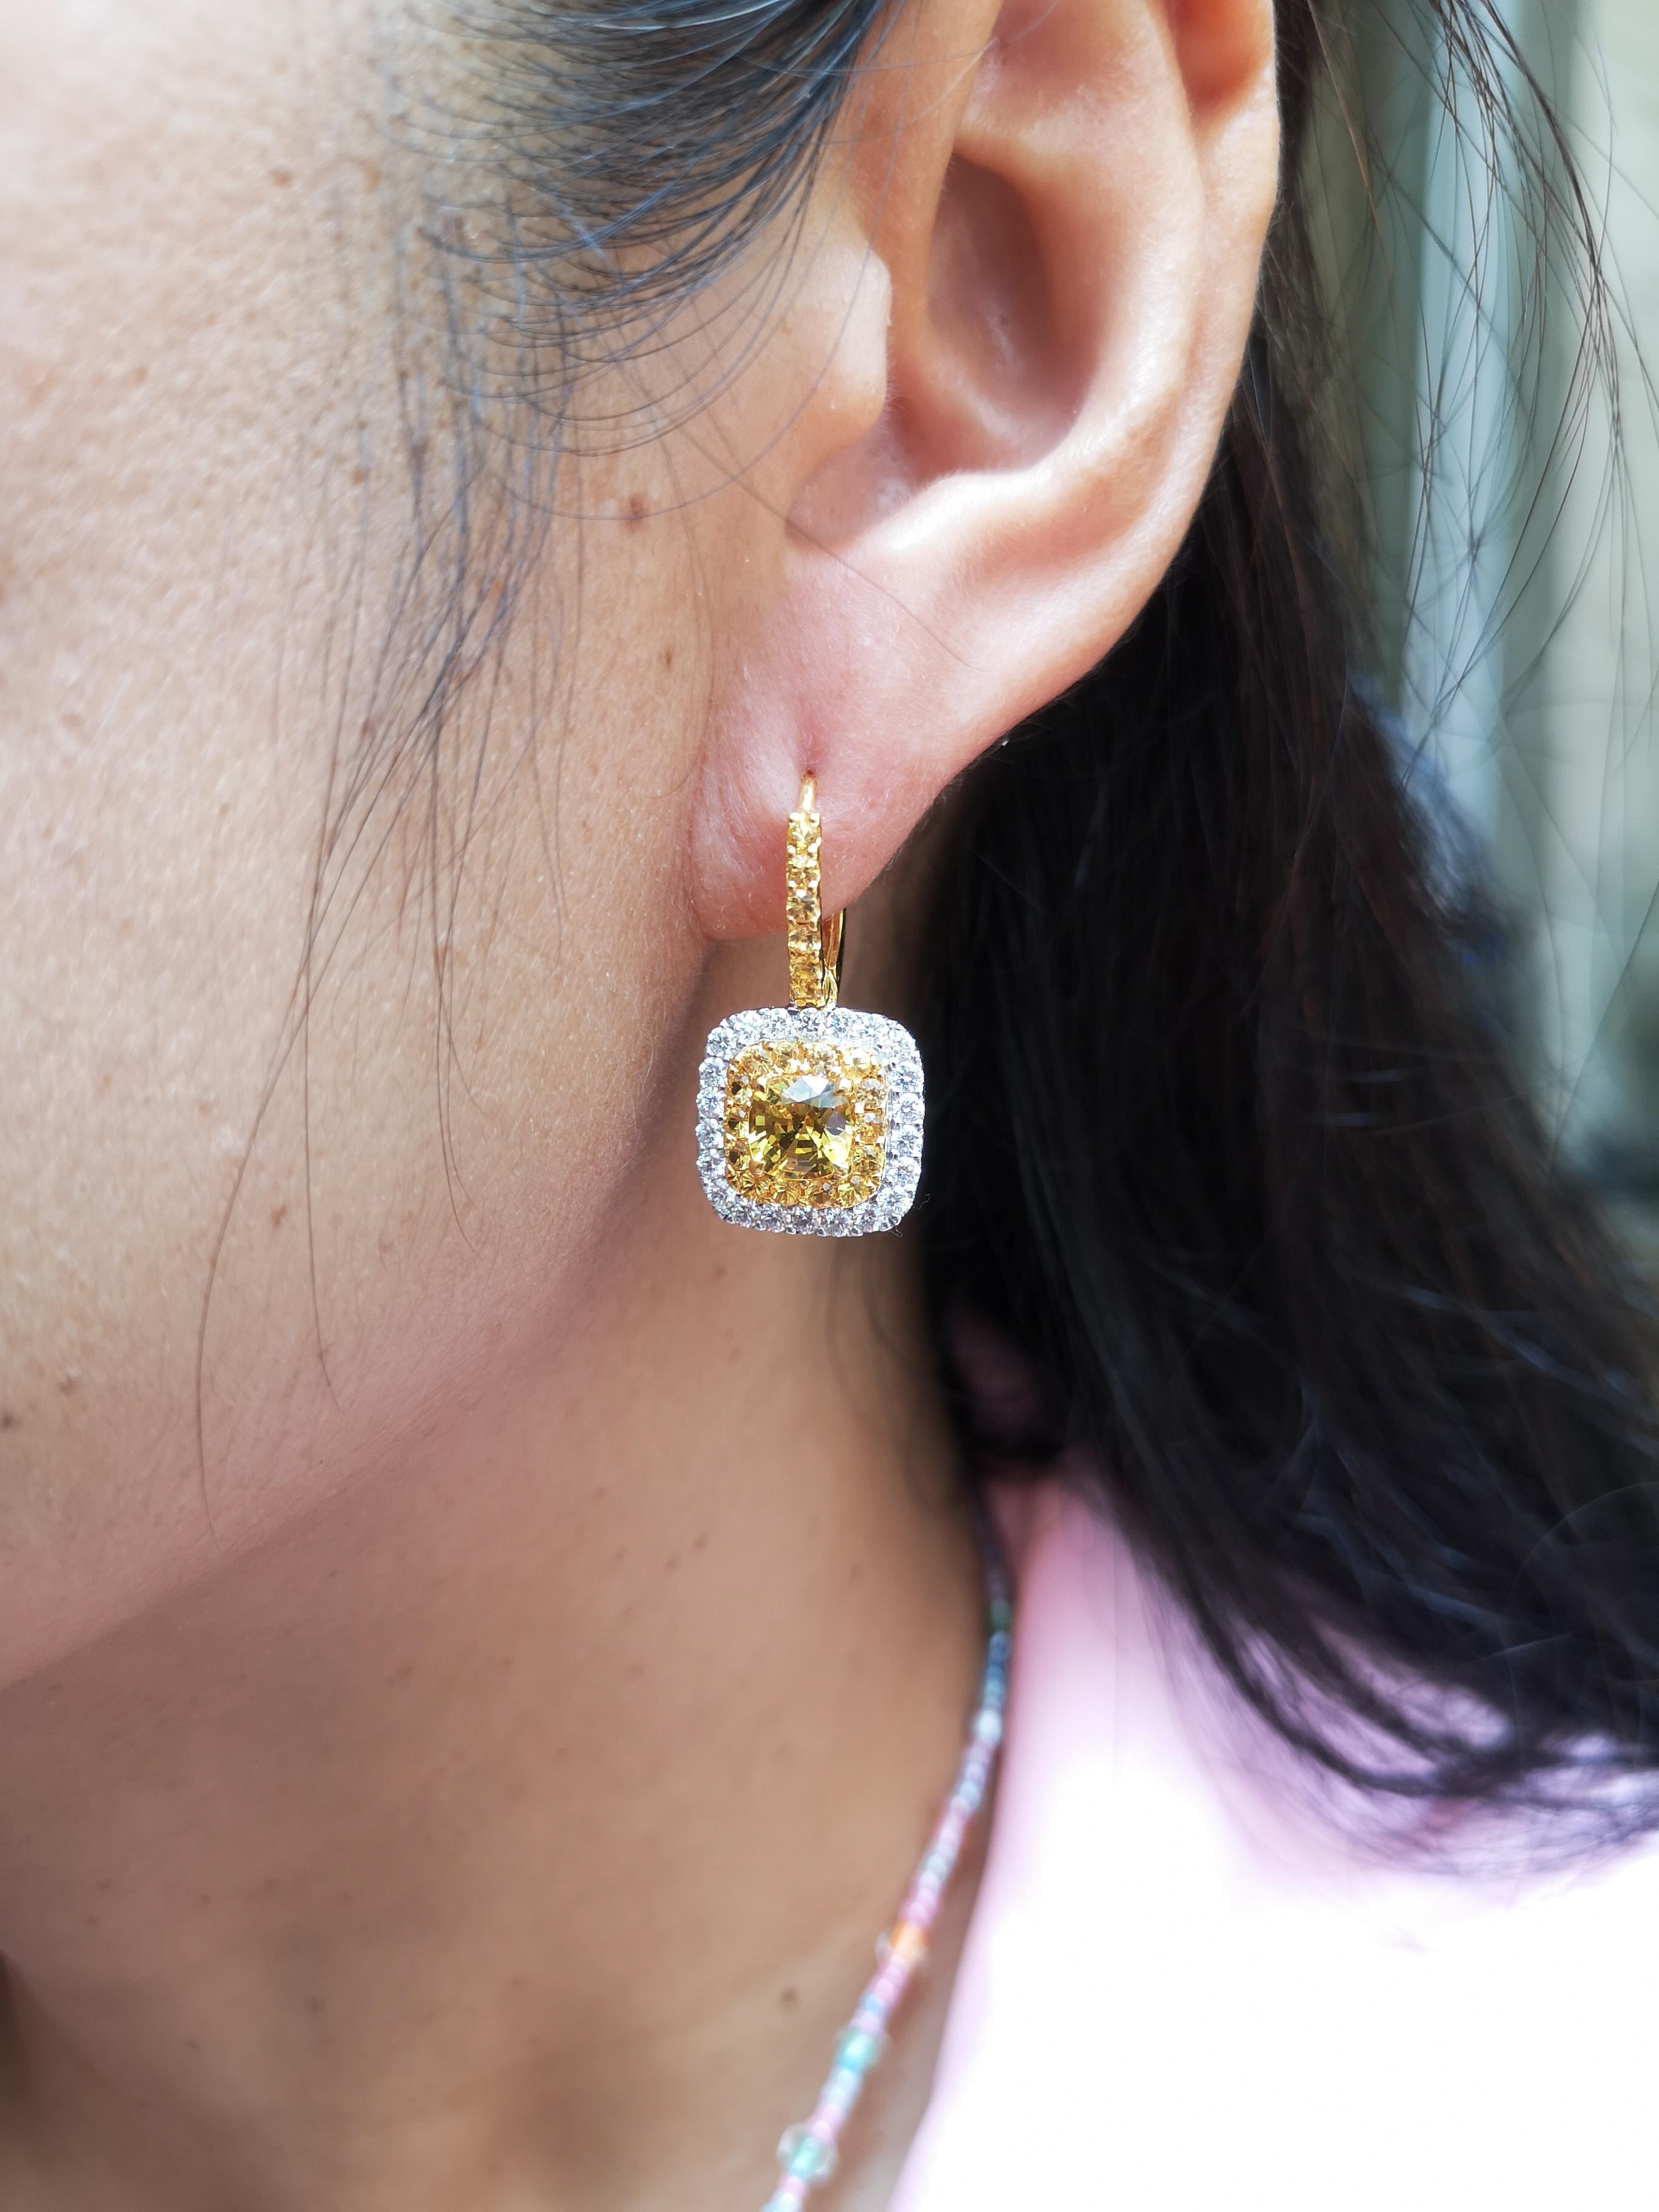 Yellow Sapphire 2.31 carats with Yellow Sapphire 1.14 carats and Diamond 1.04 carats Earrings set in 18 Karat White Gold Settings

Width: 1.5 cm
Length: 2.5 cm 

